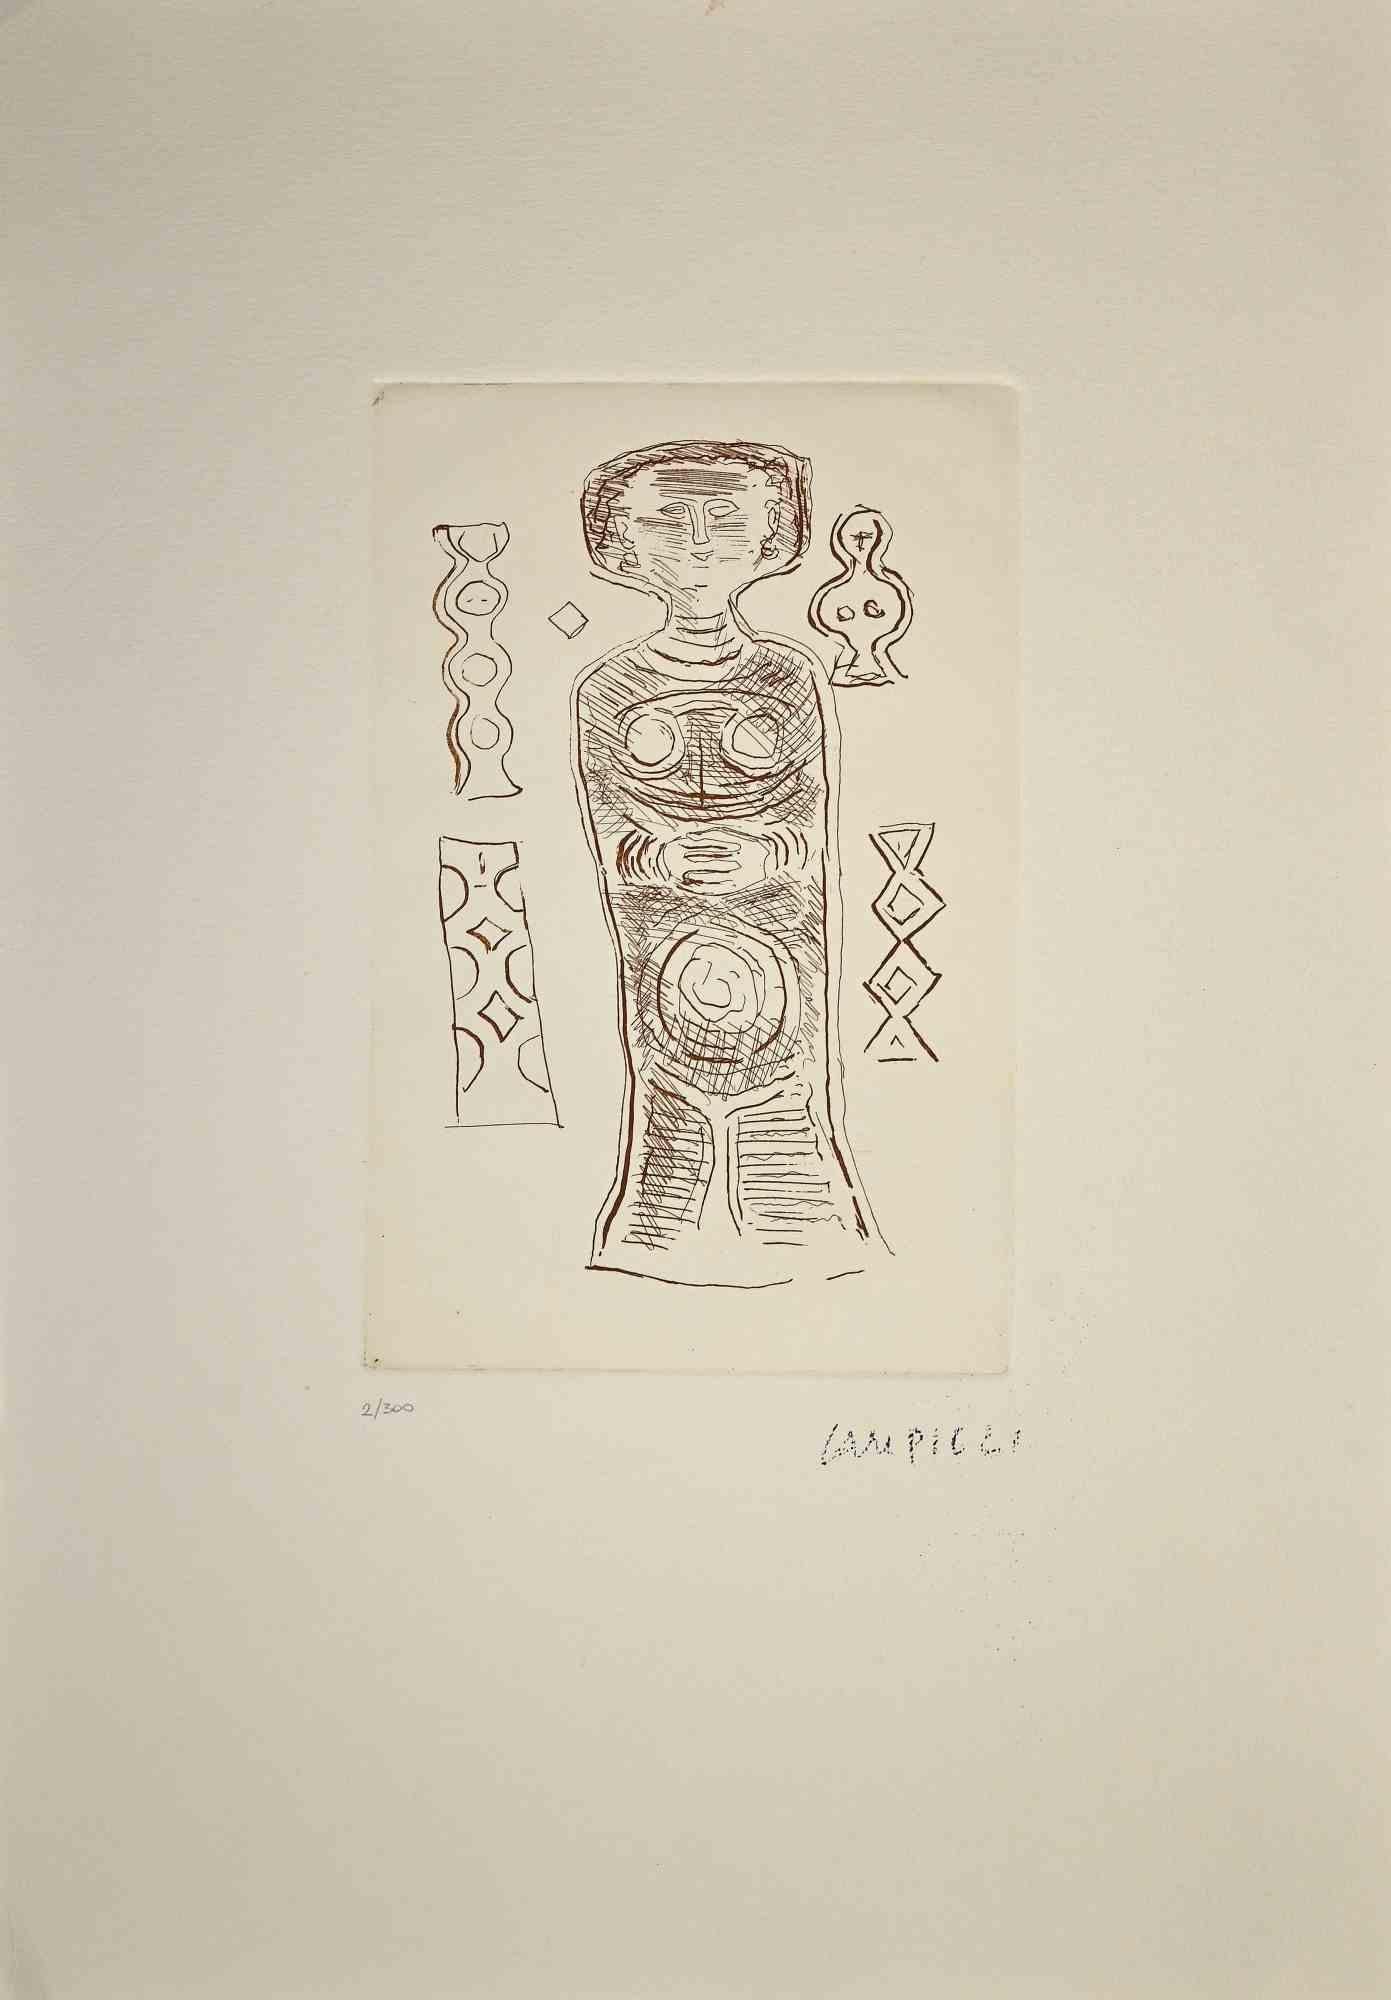 The idol  is a print realized by Massimo Campigli in the 1970/1971s.

Etching on paper.

This artwork it is part of a series of works created in the last period of the artist and printed at the turn of the year of his death, which took place in